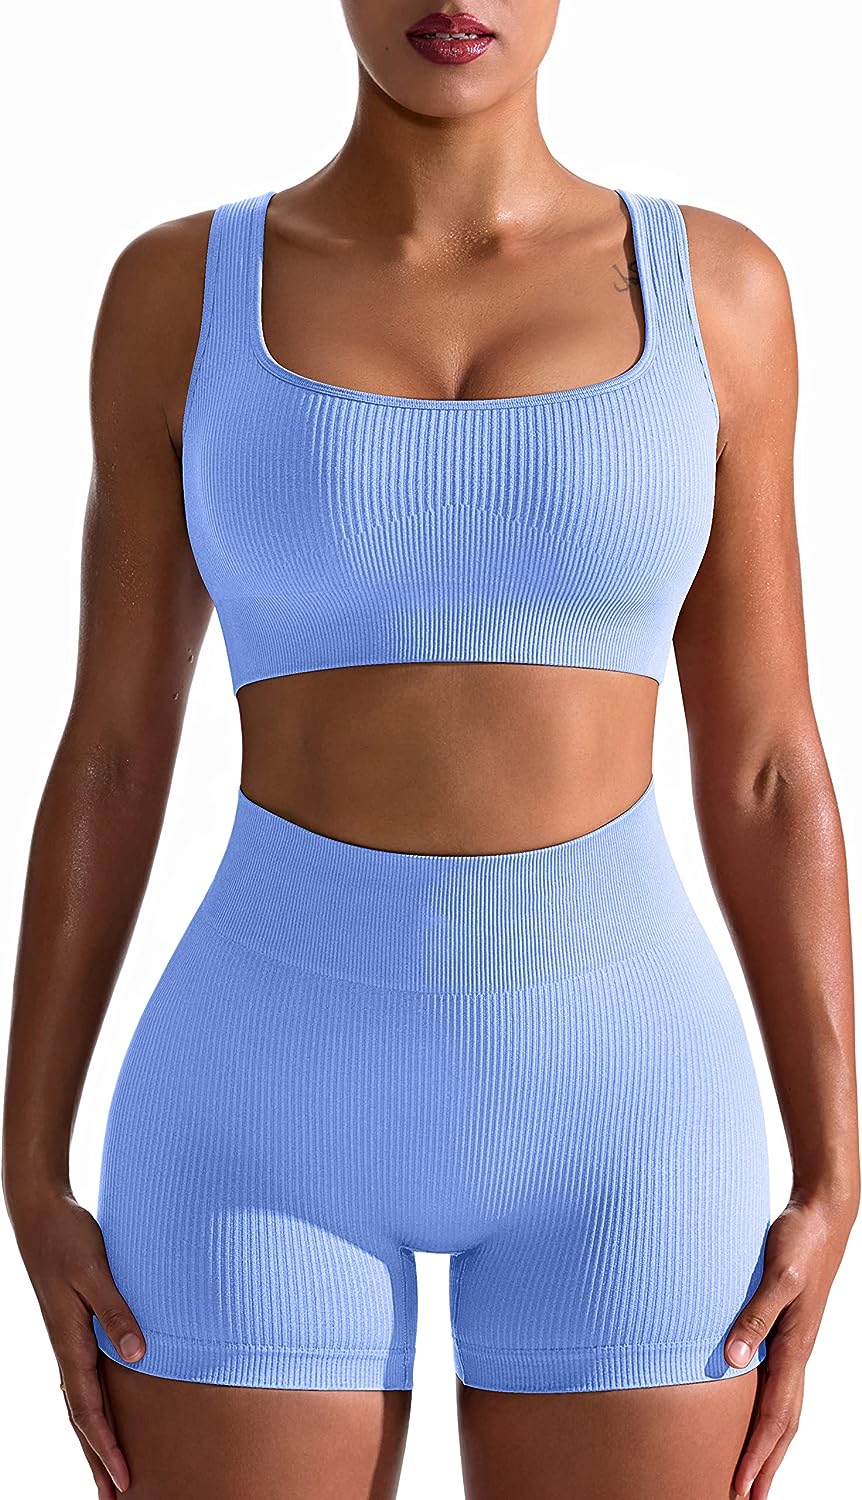 Women's 2 Piece Seamless Ribbed High Waist Short with Sports Bra Exercise Set - Blue